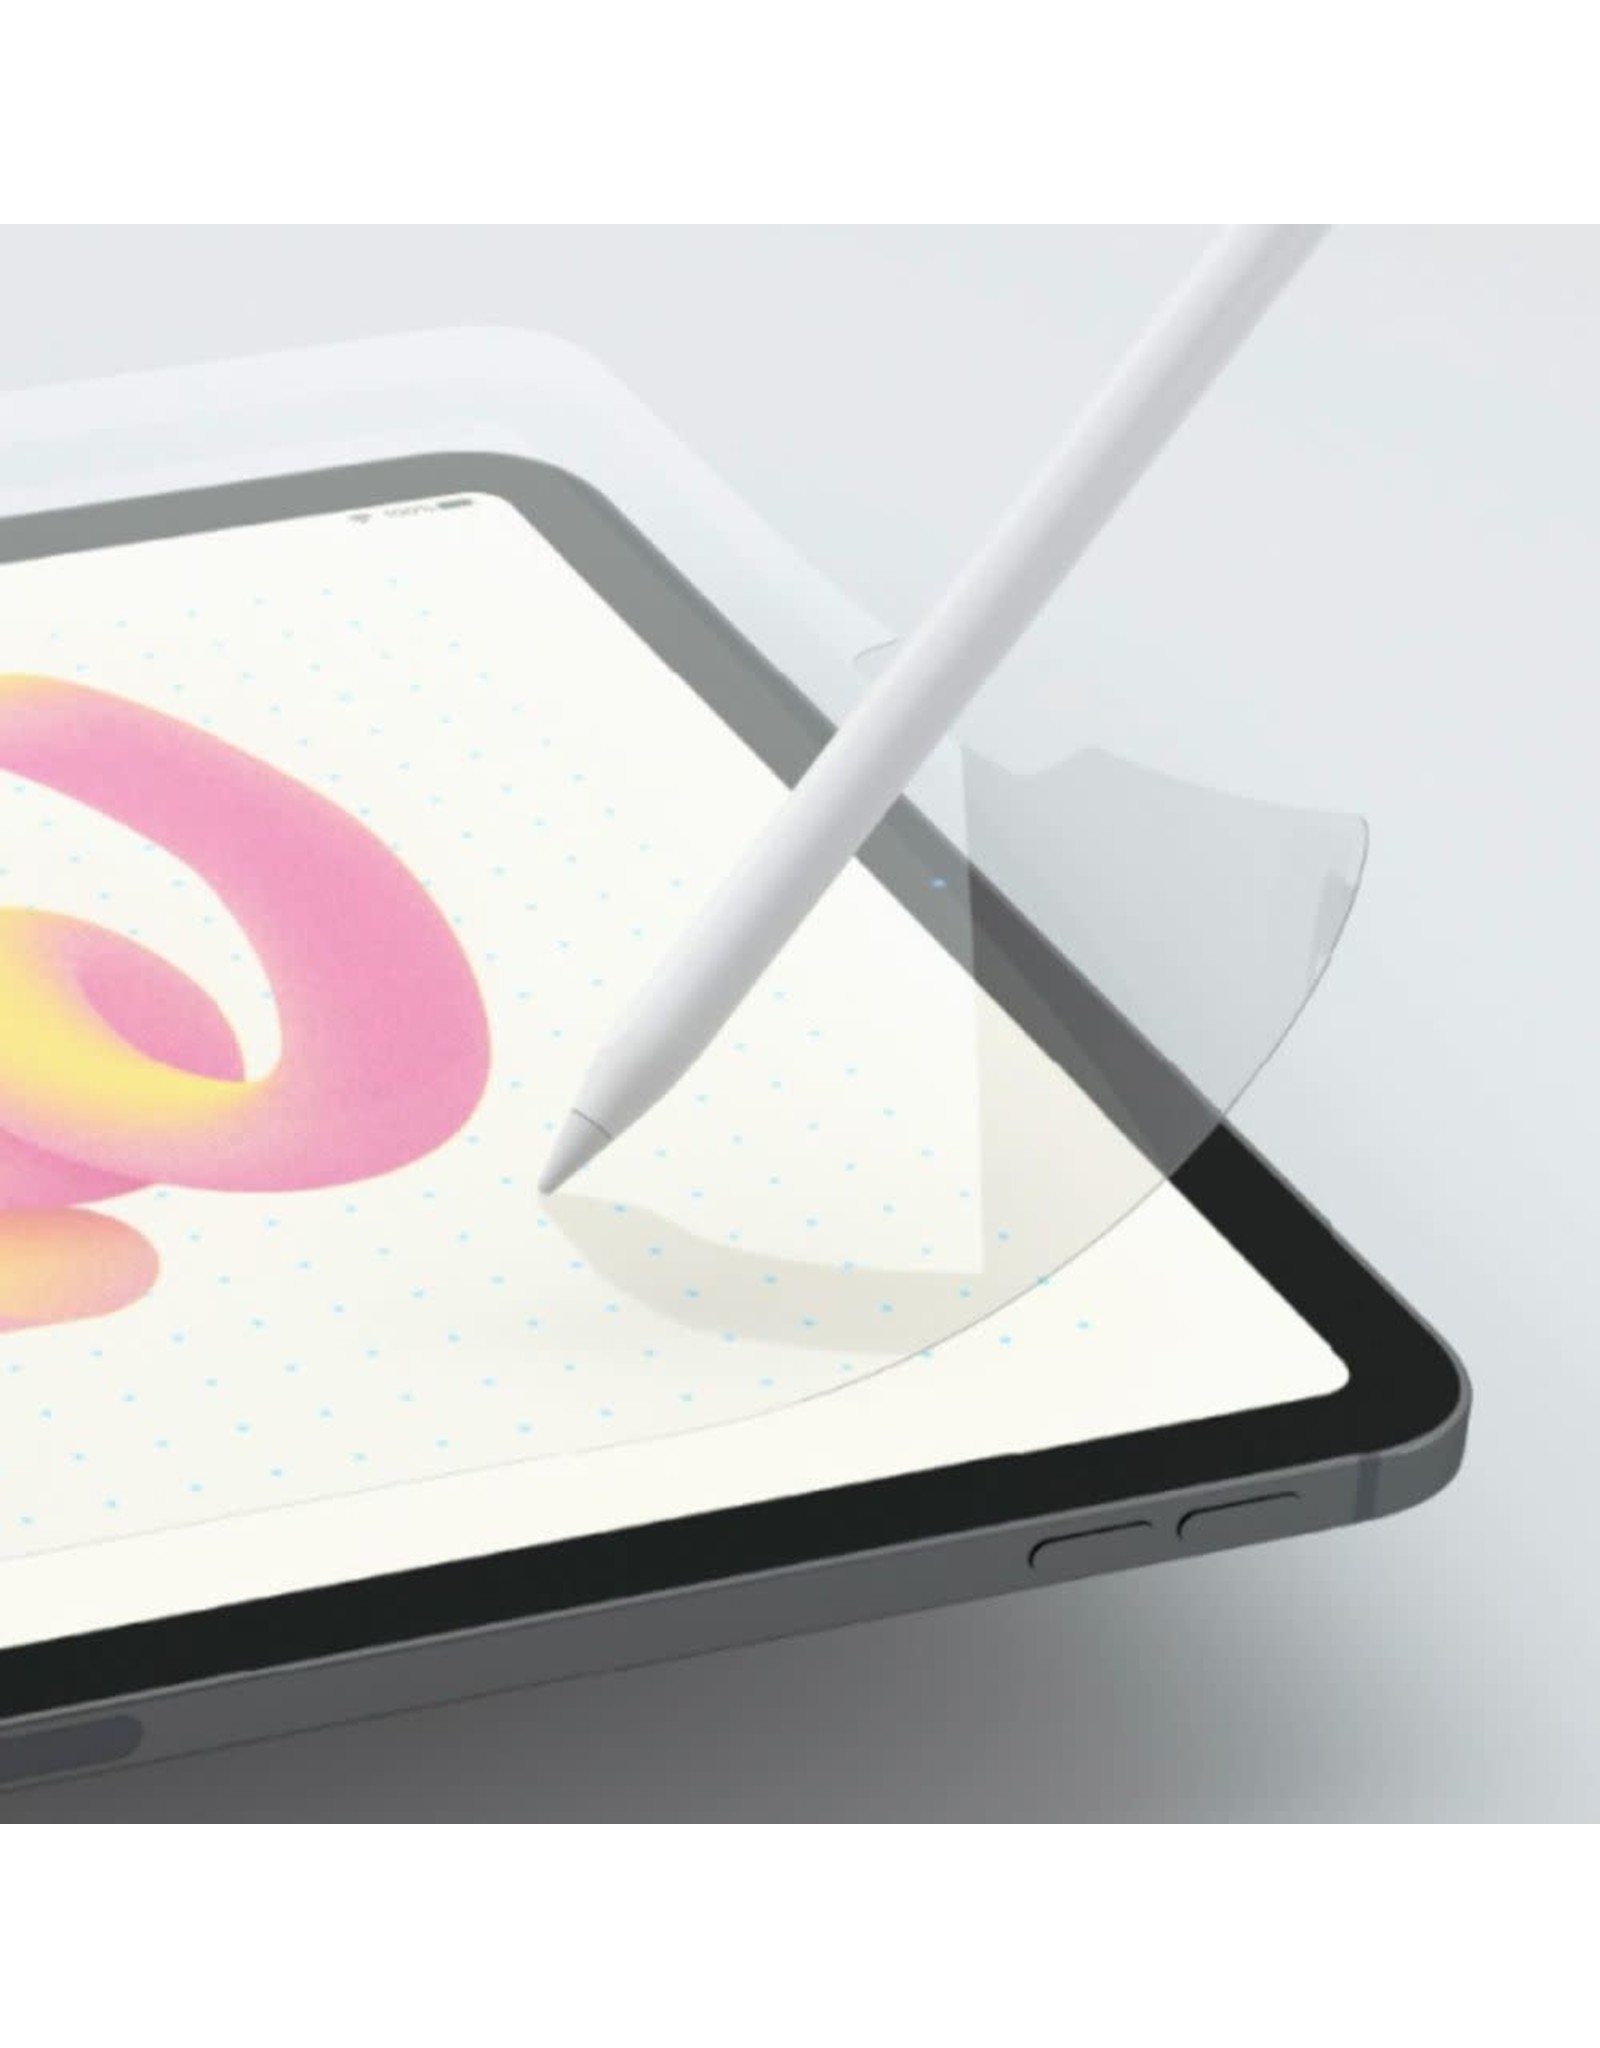 Paperlike Paperlike Screen Protector (v2.1) for iPad 10.2" (9th gen 2019/20/21) for Writing & Drawing (x2 pack)